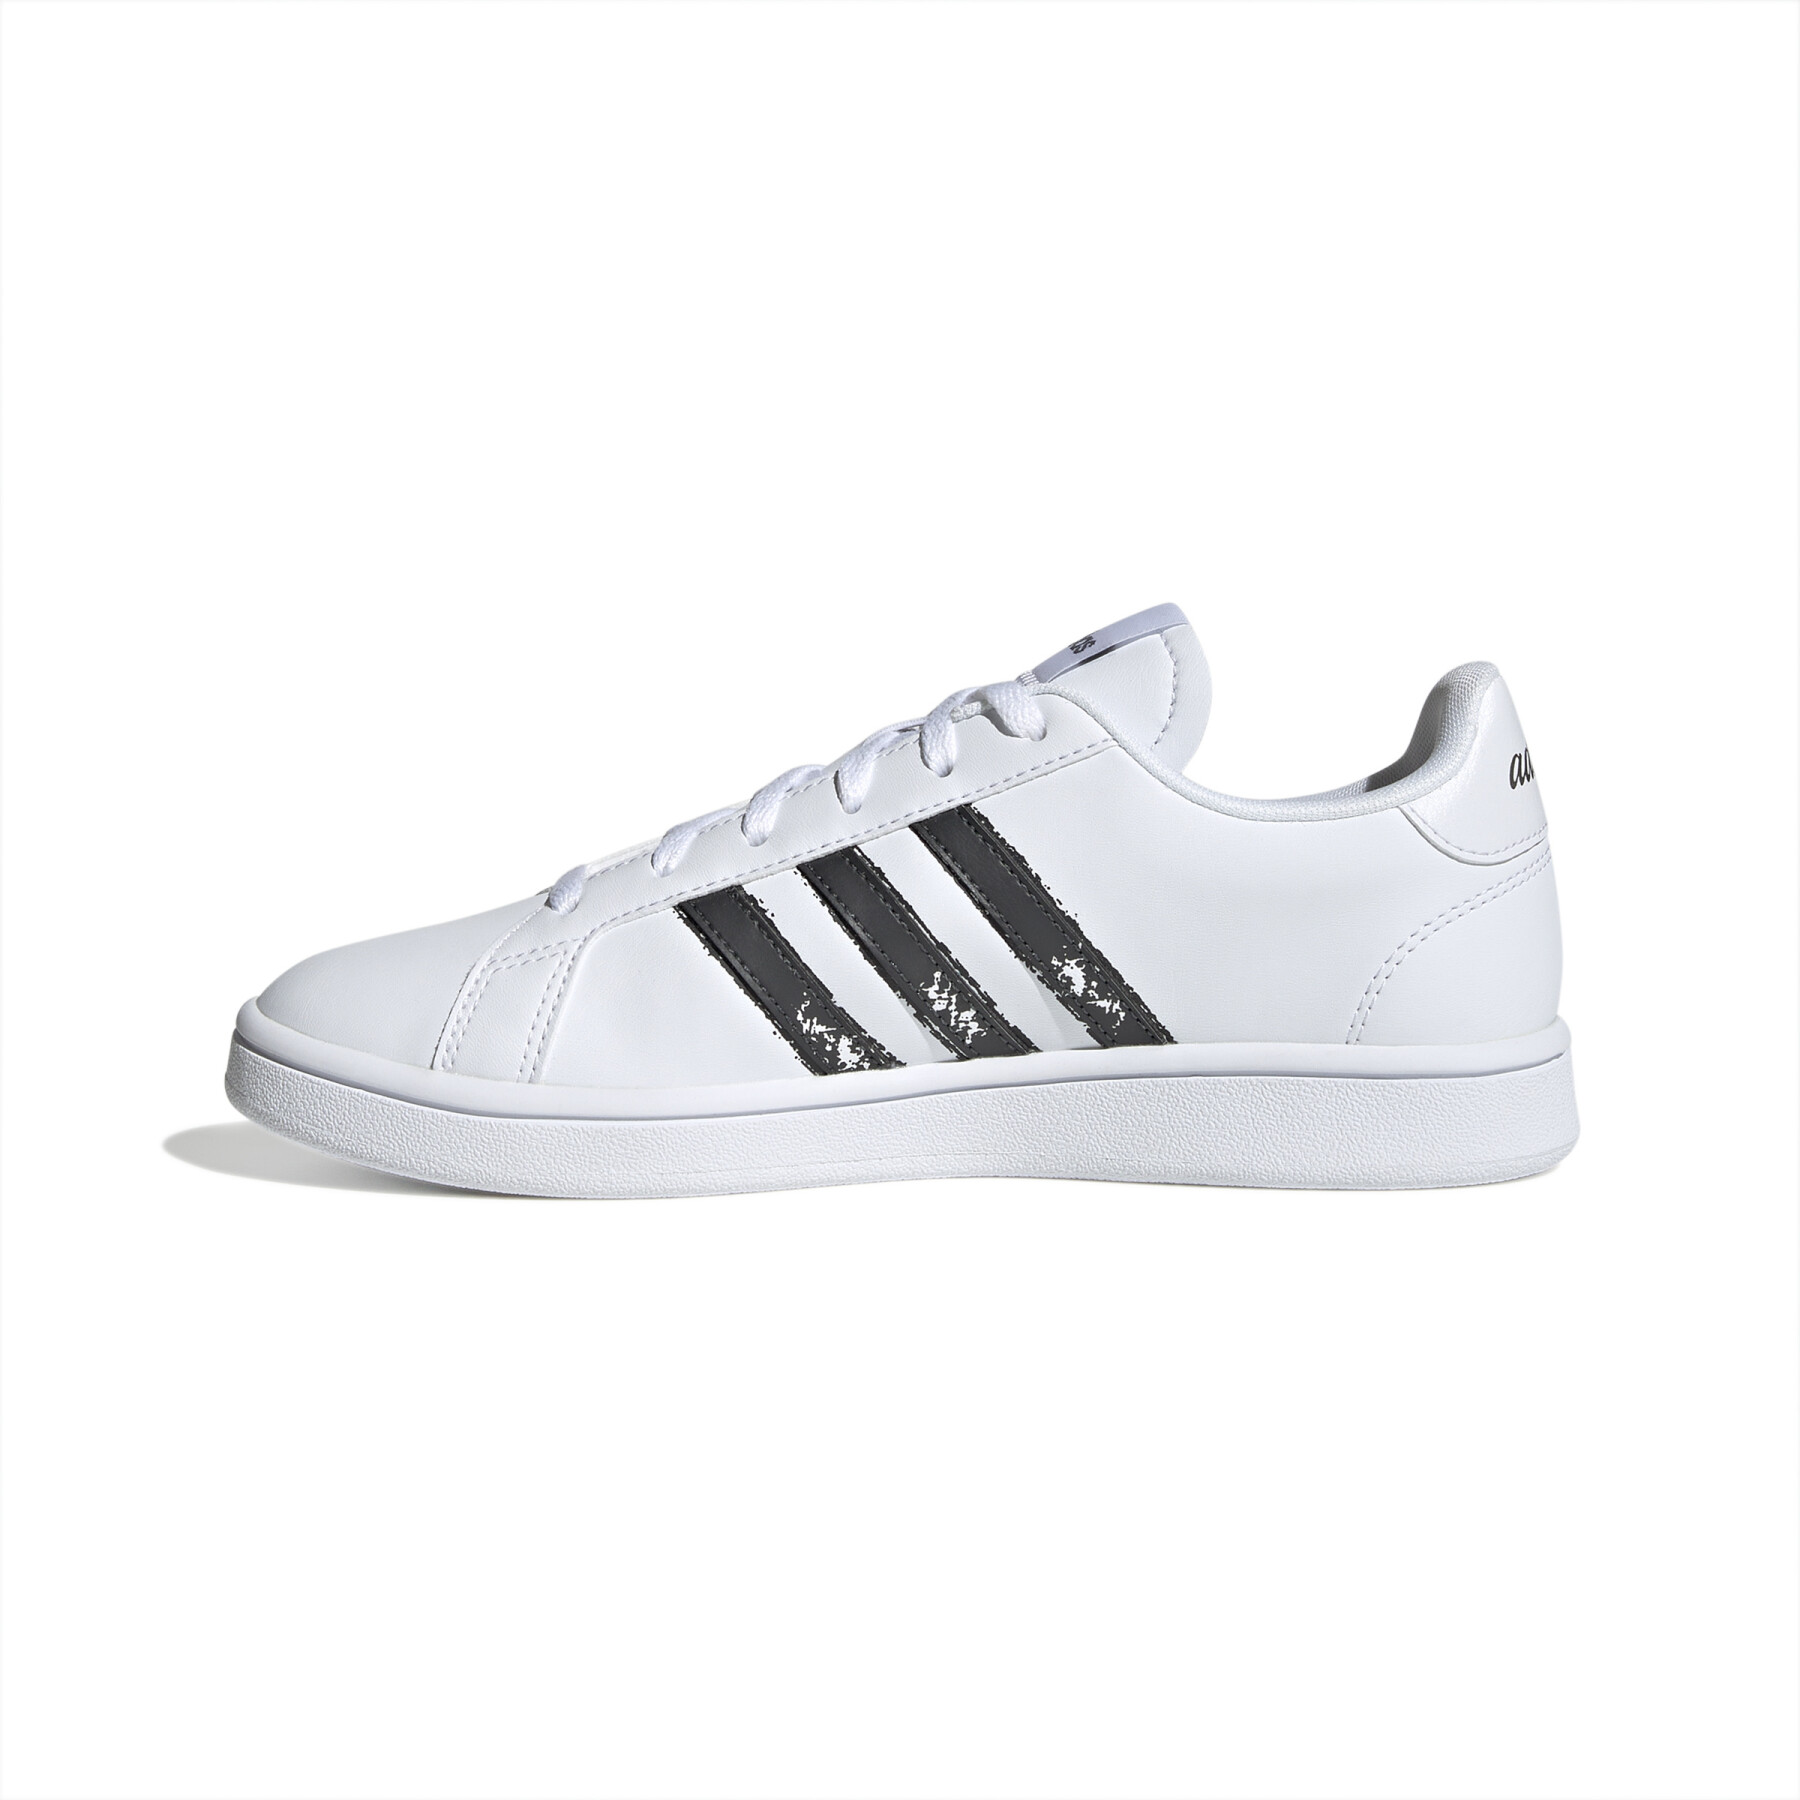 Sneakers adidas Grand Court Base Beyond